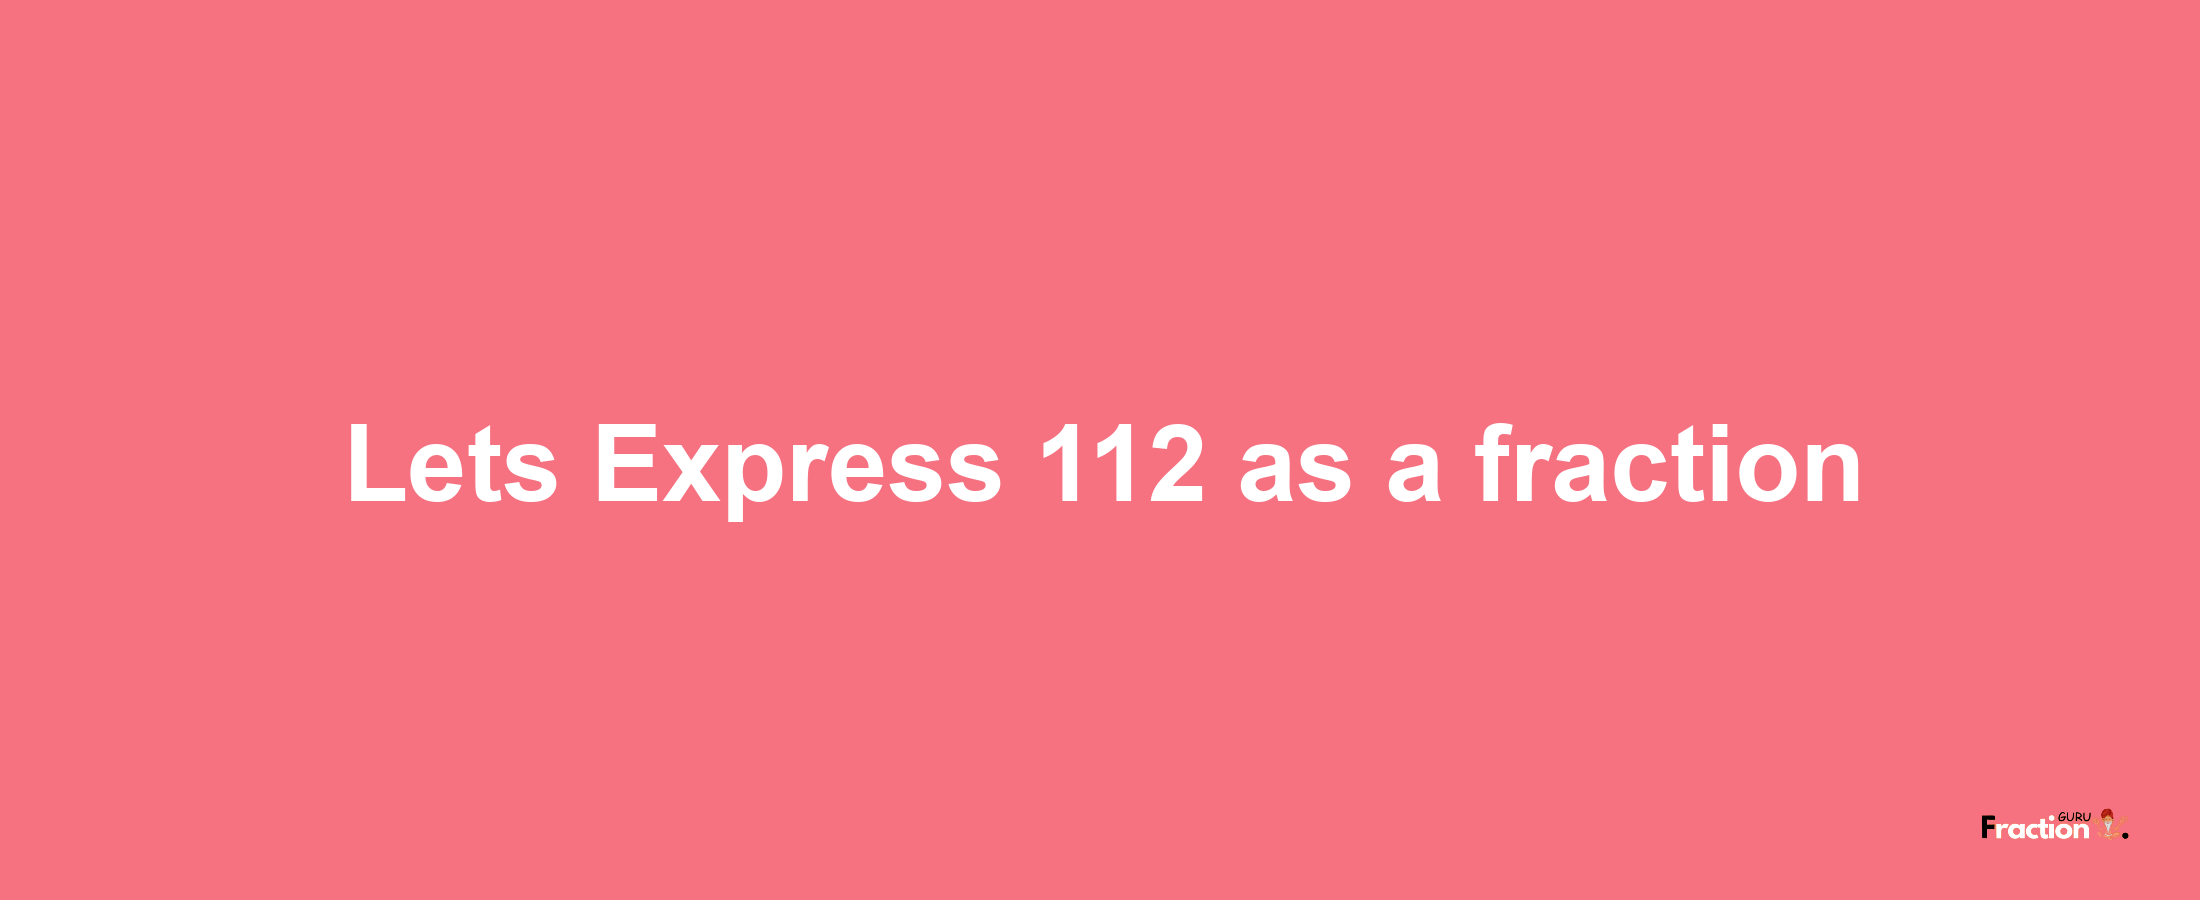 Lets Express 112 as afraction